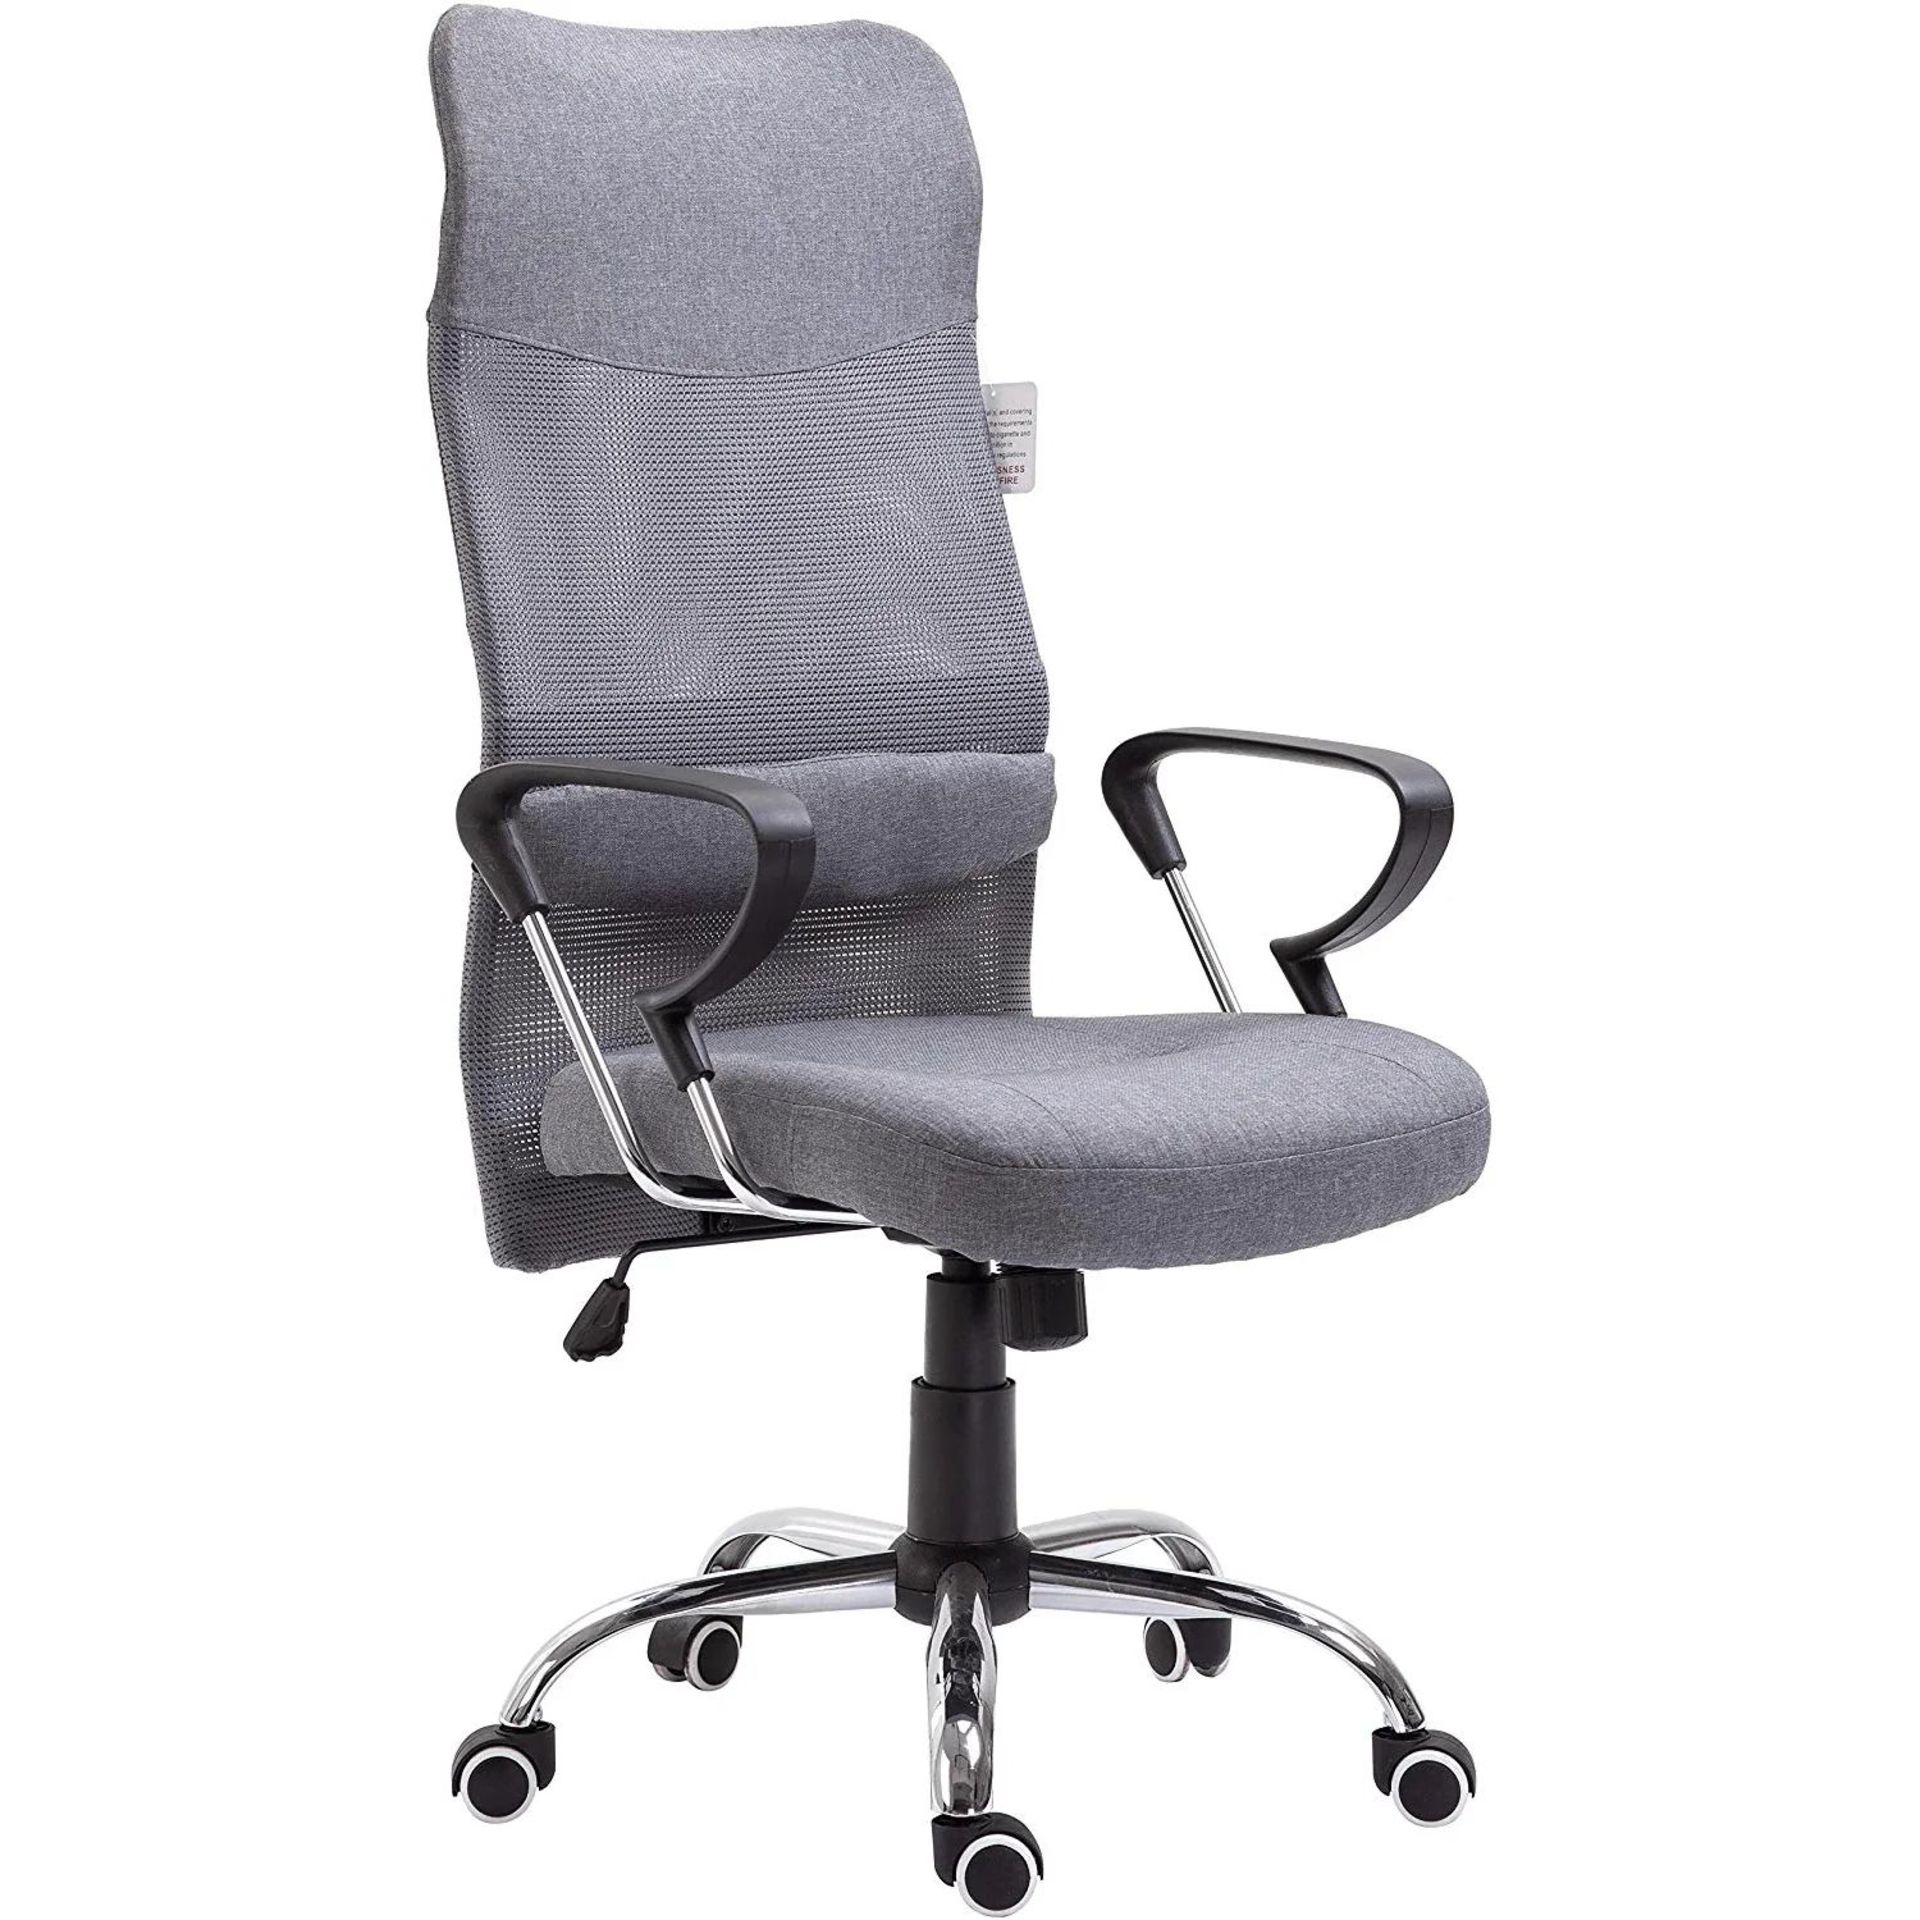 High Back Mesh Fabric Swivel Office Chair, MO57 Grey. - R13.13. - Image 2 of 2